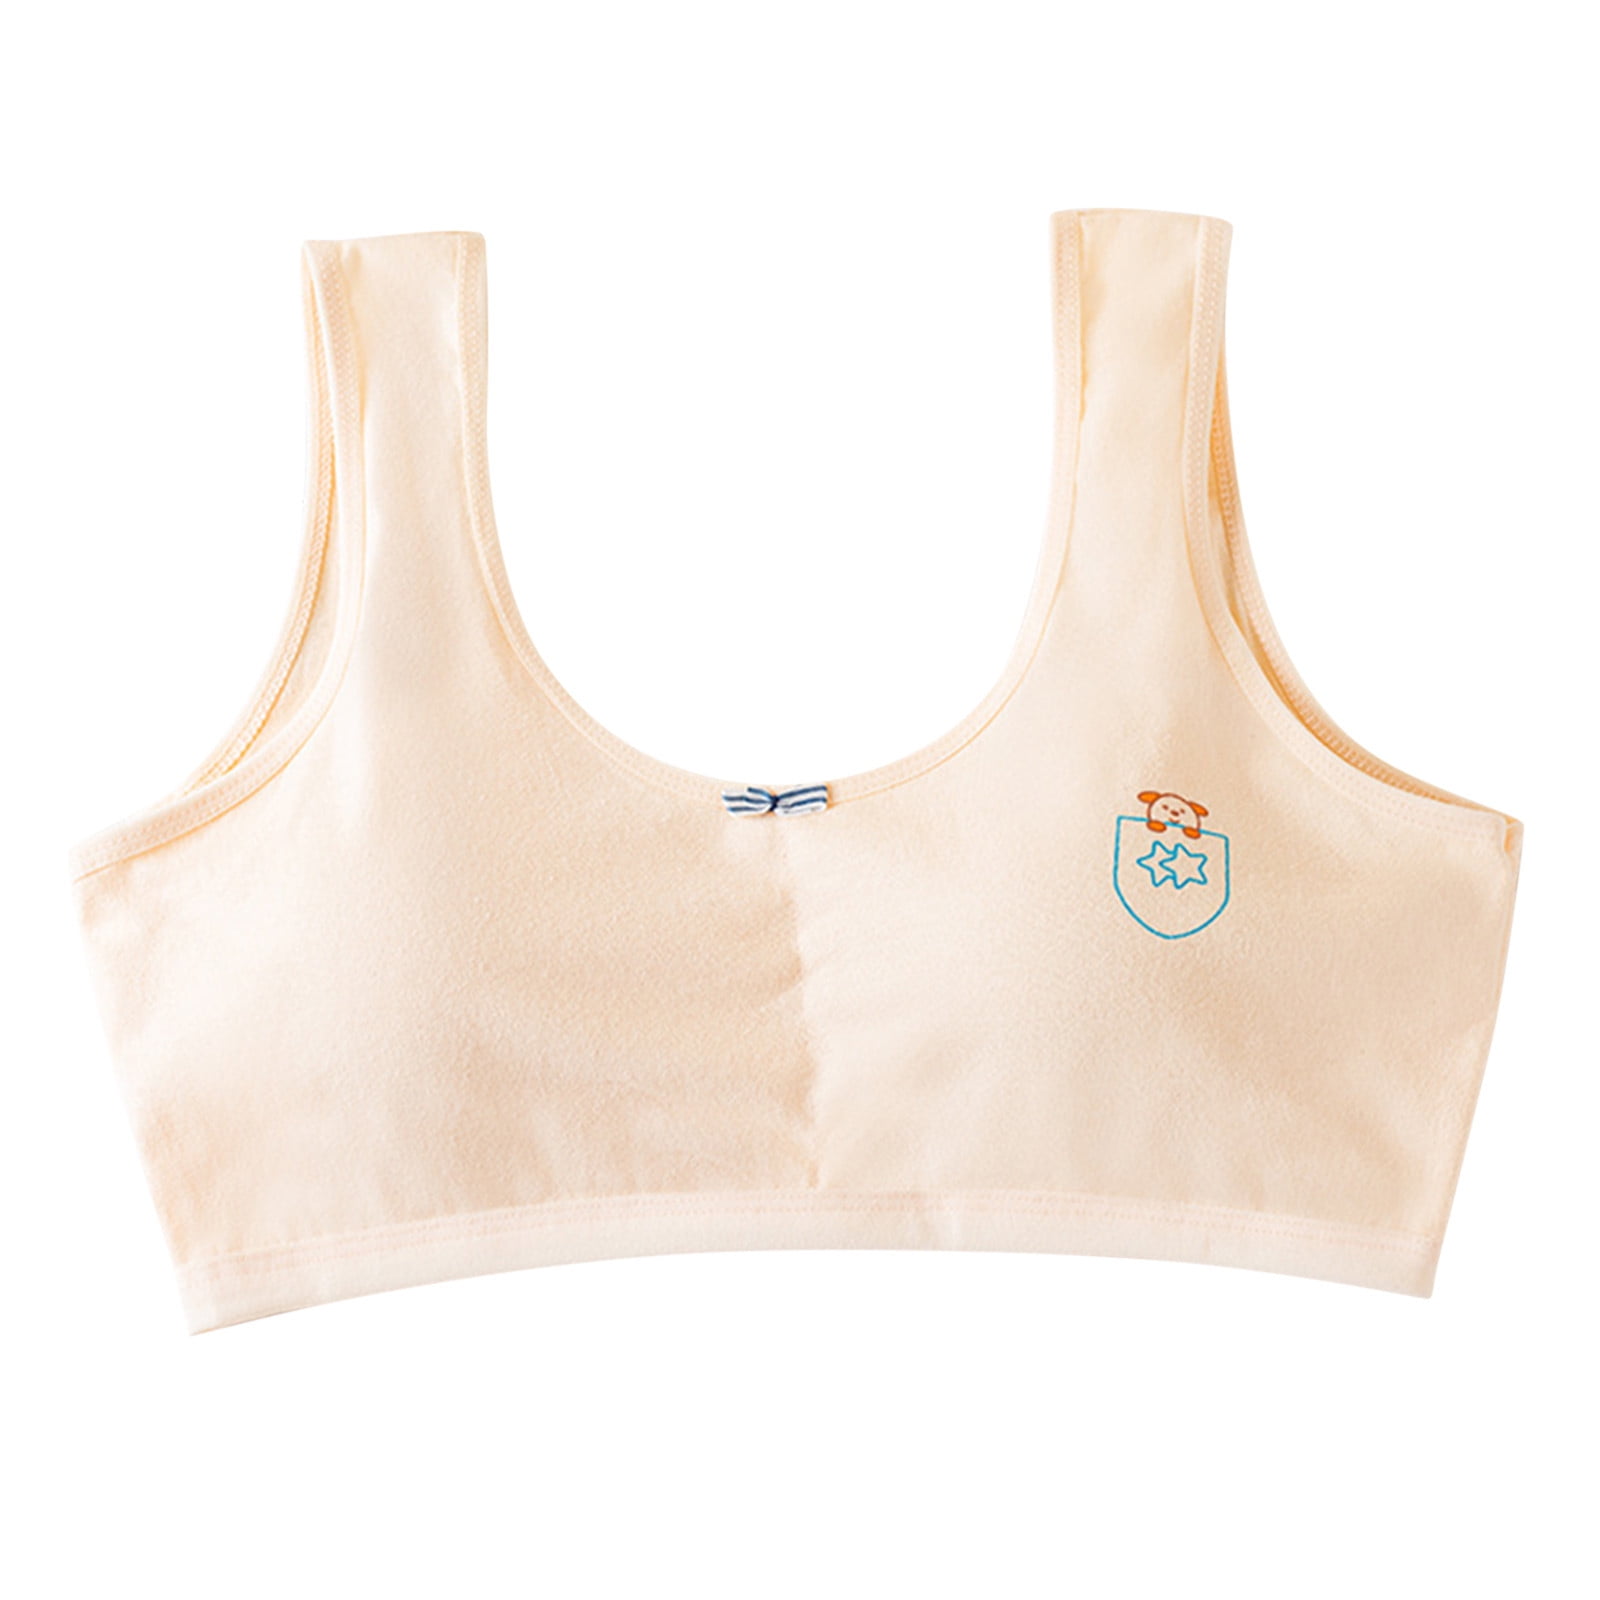 VerPetridure Sports Bras for Girls 10-12 Years Old Soft